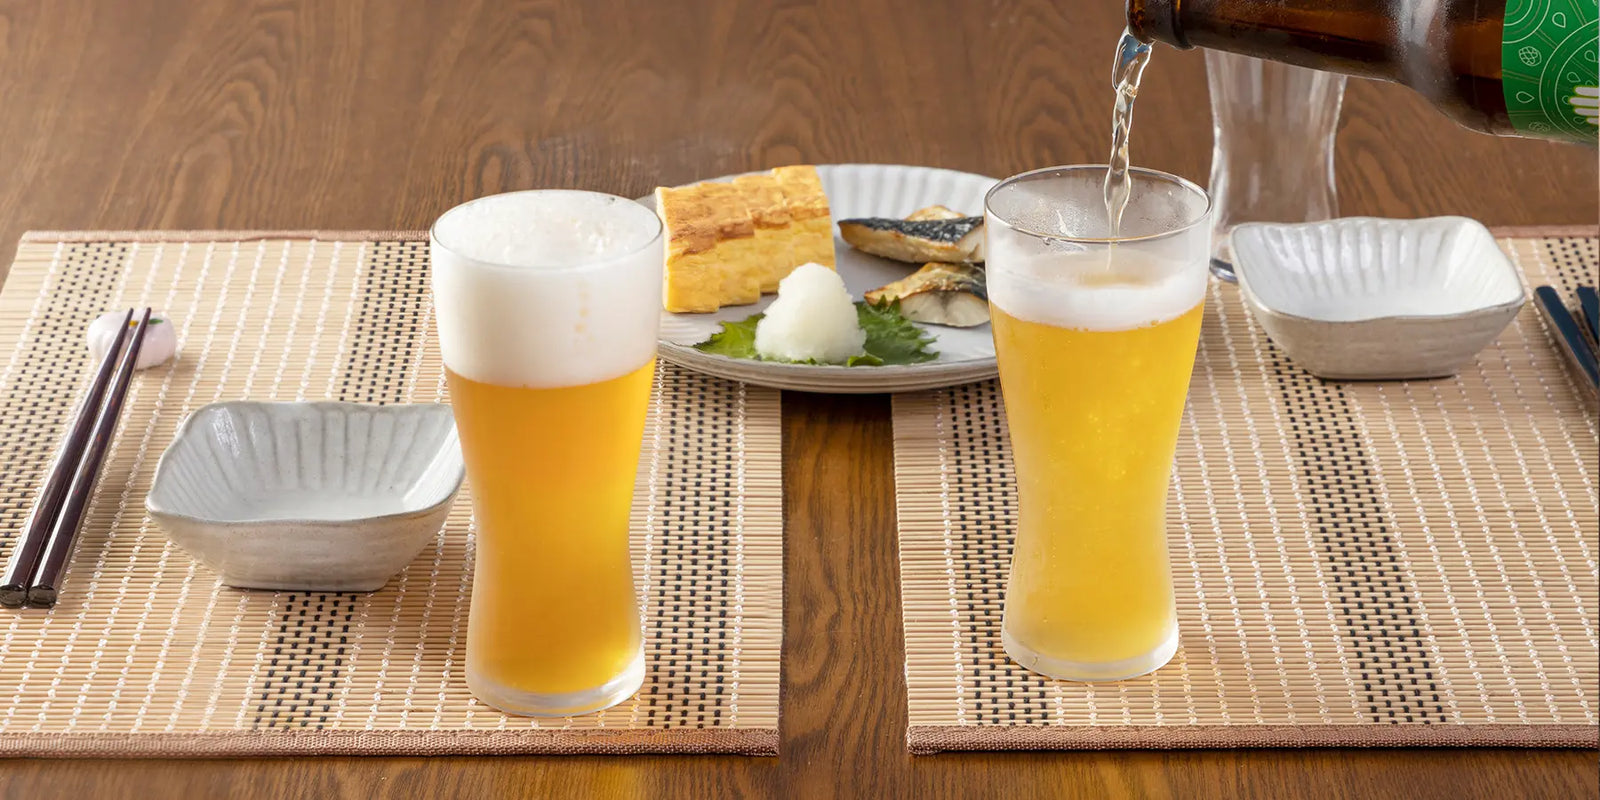 Why are Japanese beer glasses so small? - Quora